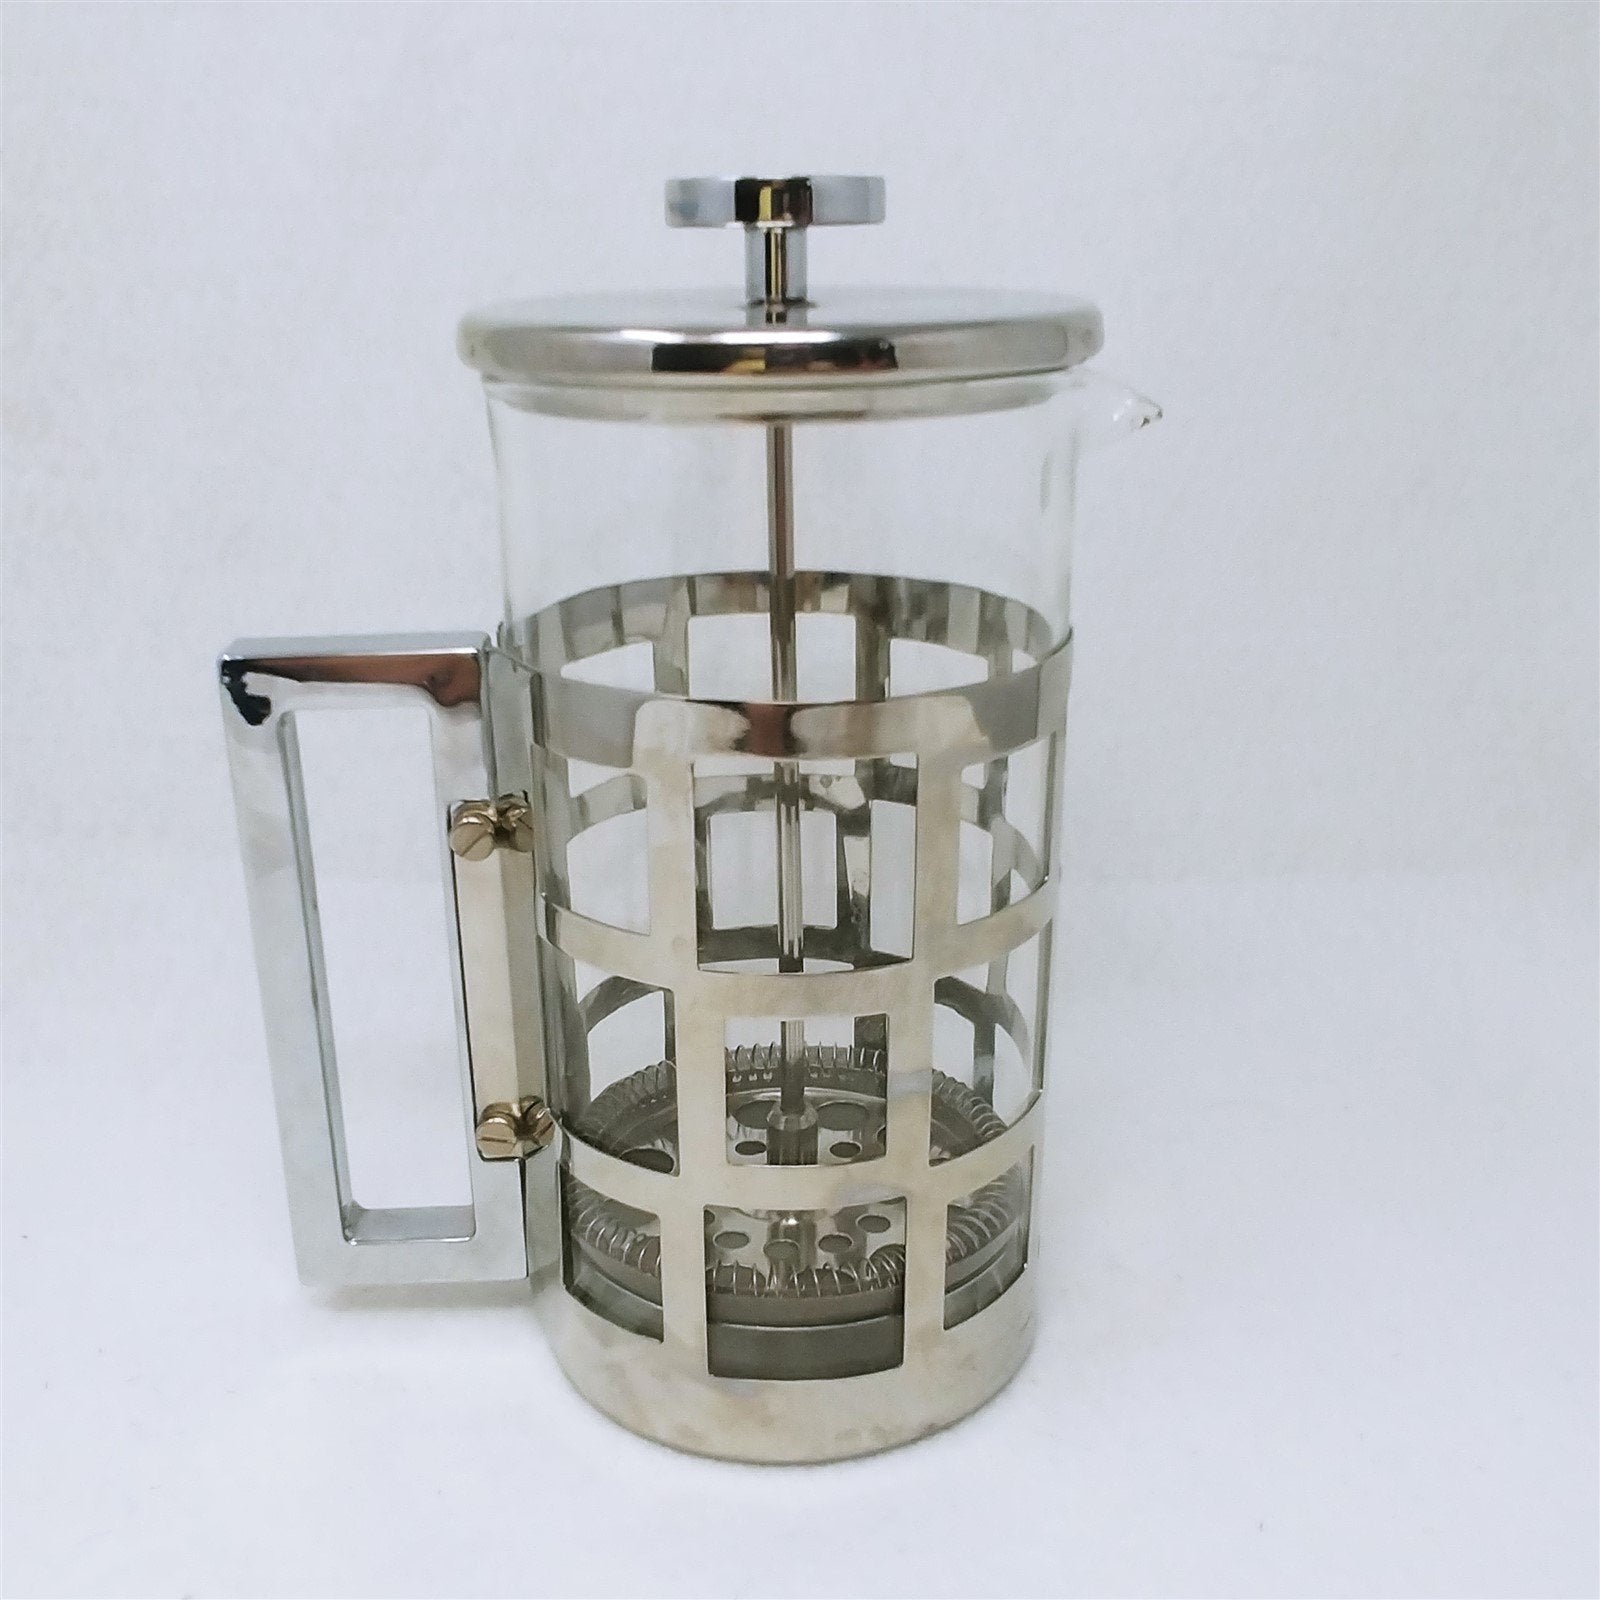 Coffeepot French Press Stainless Steel and Glass 4 Cup Capacity